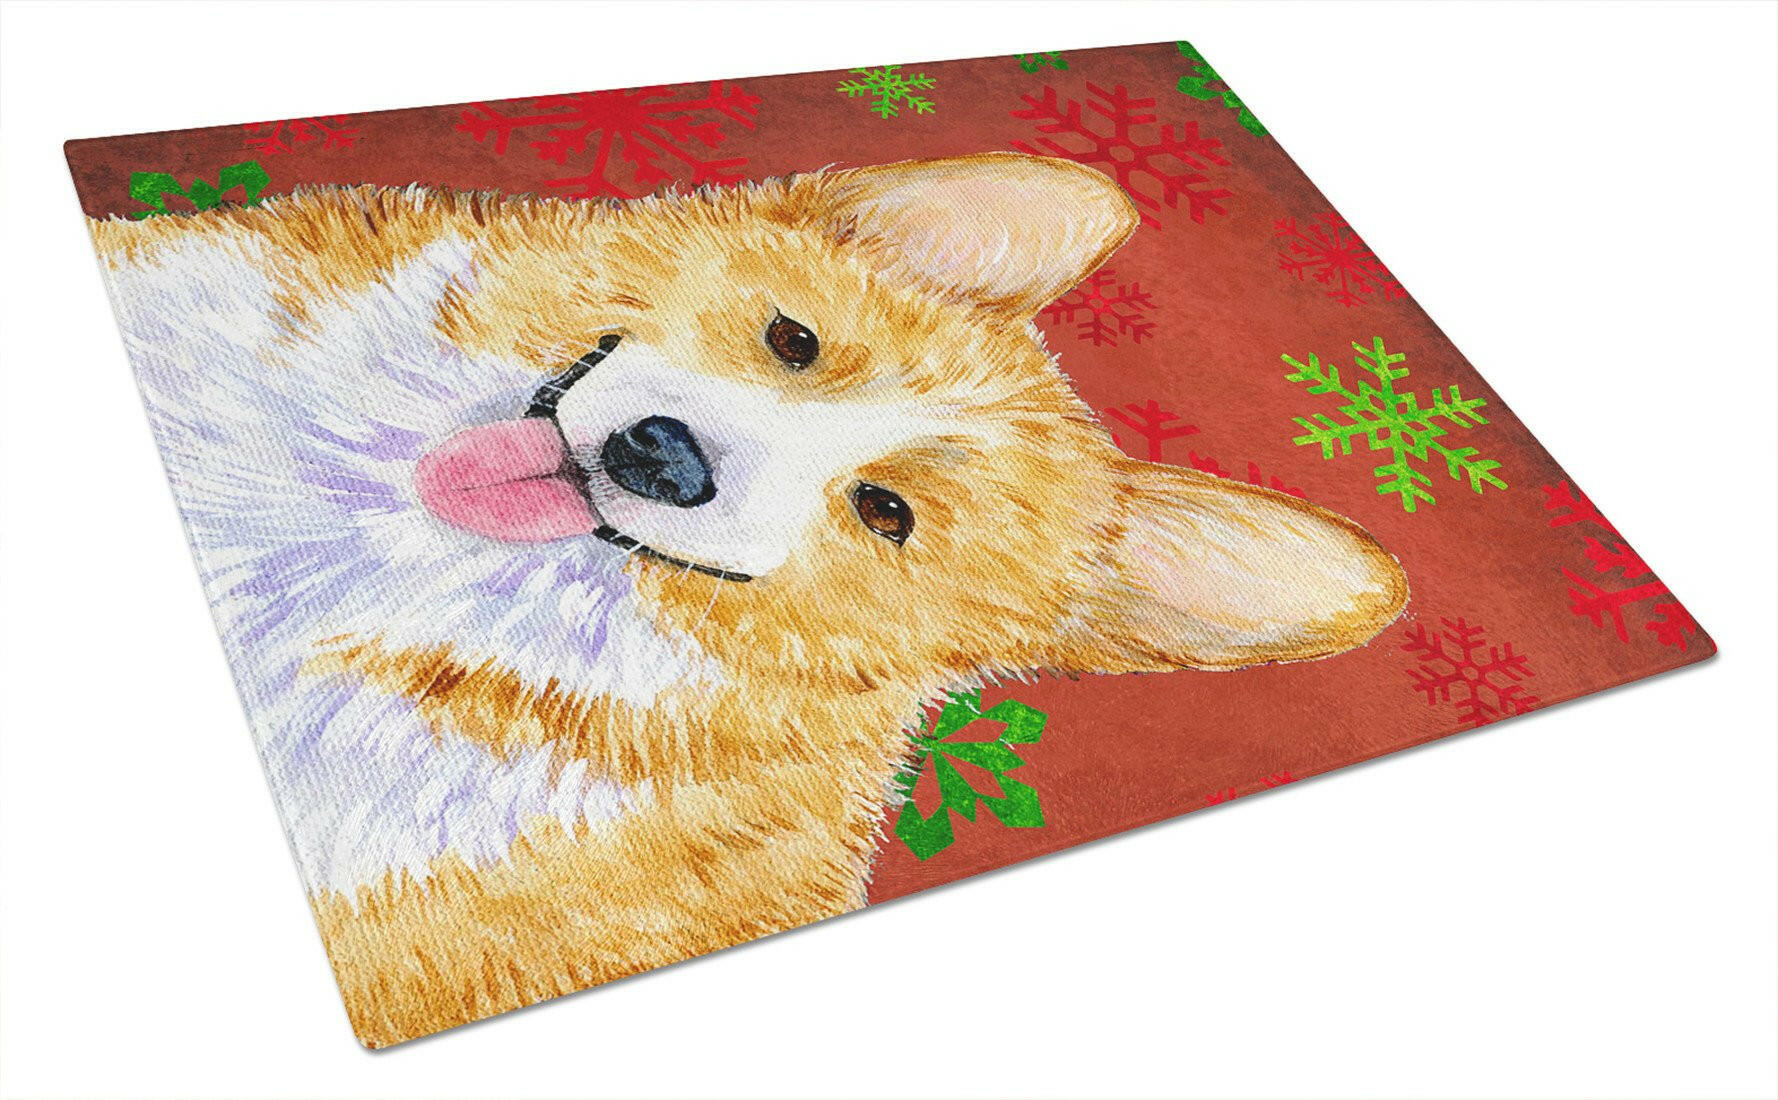 Corgi Red and Green Snowflakes Holiday Christmas Glass Cutting Board Large by Caroline's Treasures